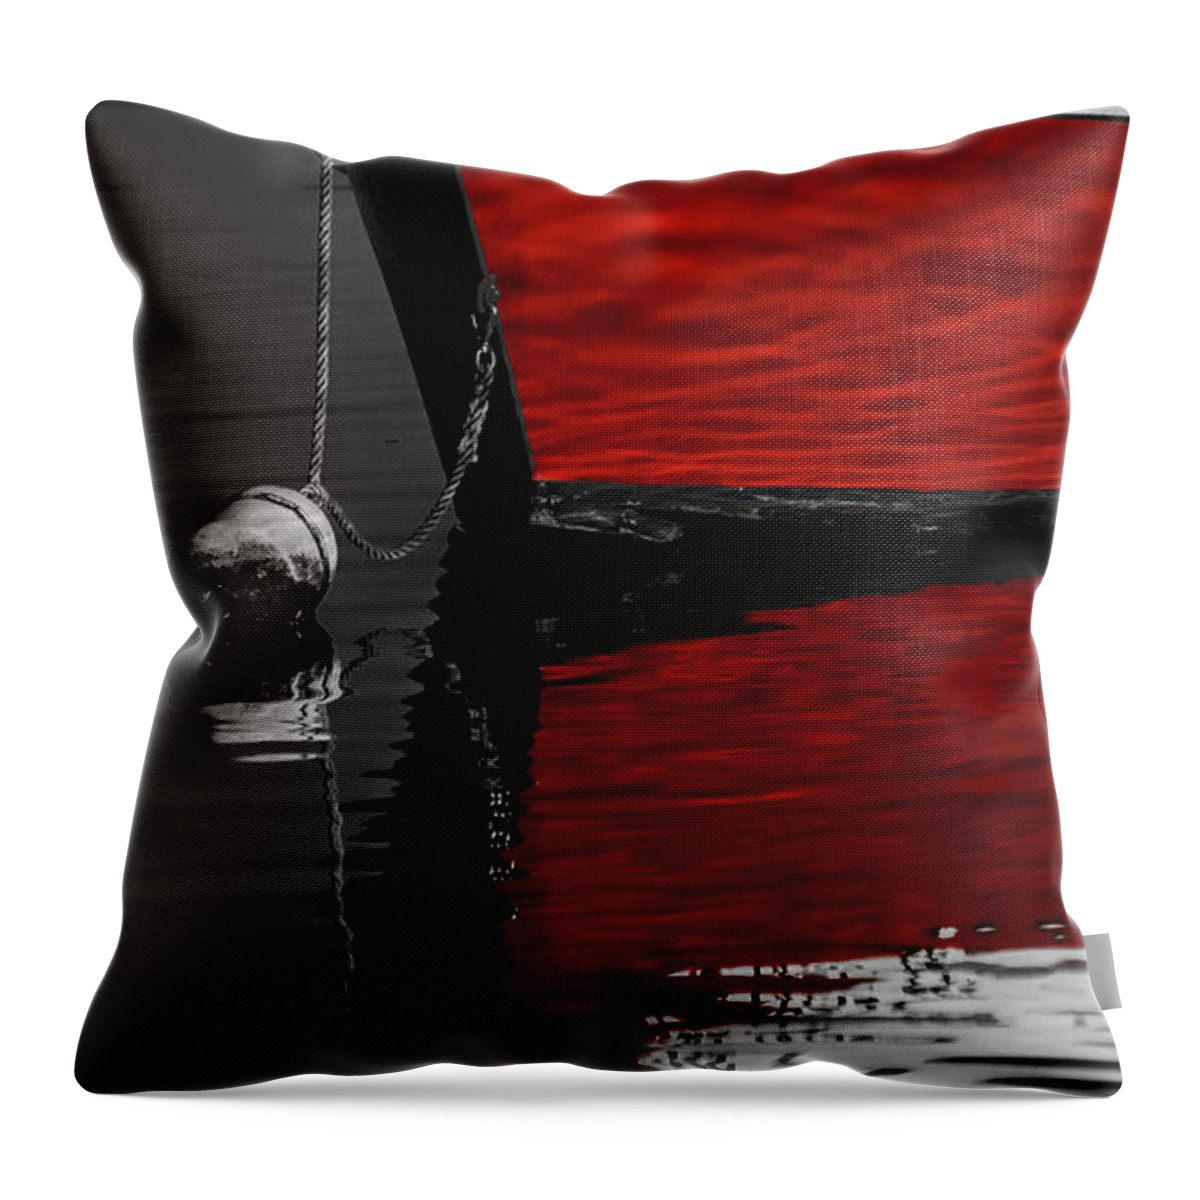 Red Boat Throw Pillow featuring the photograph Red Boat 2 by Darius Aniunas